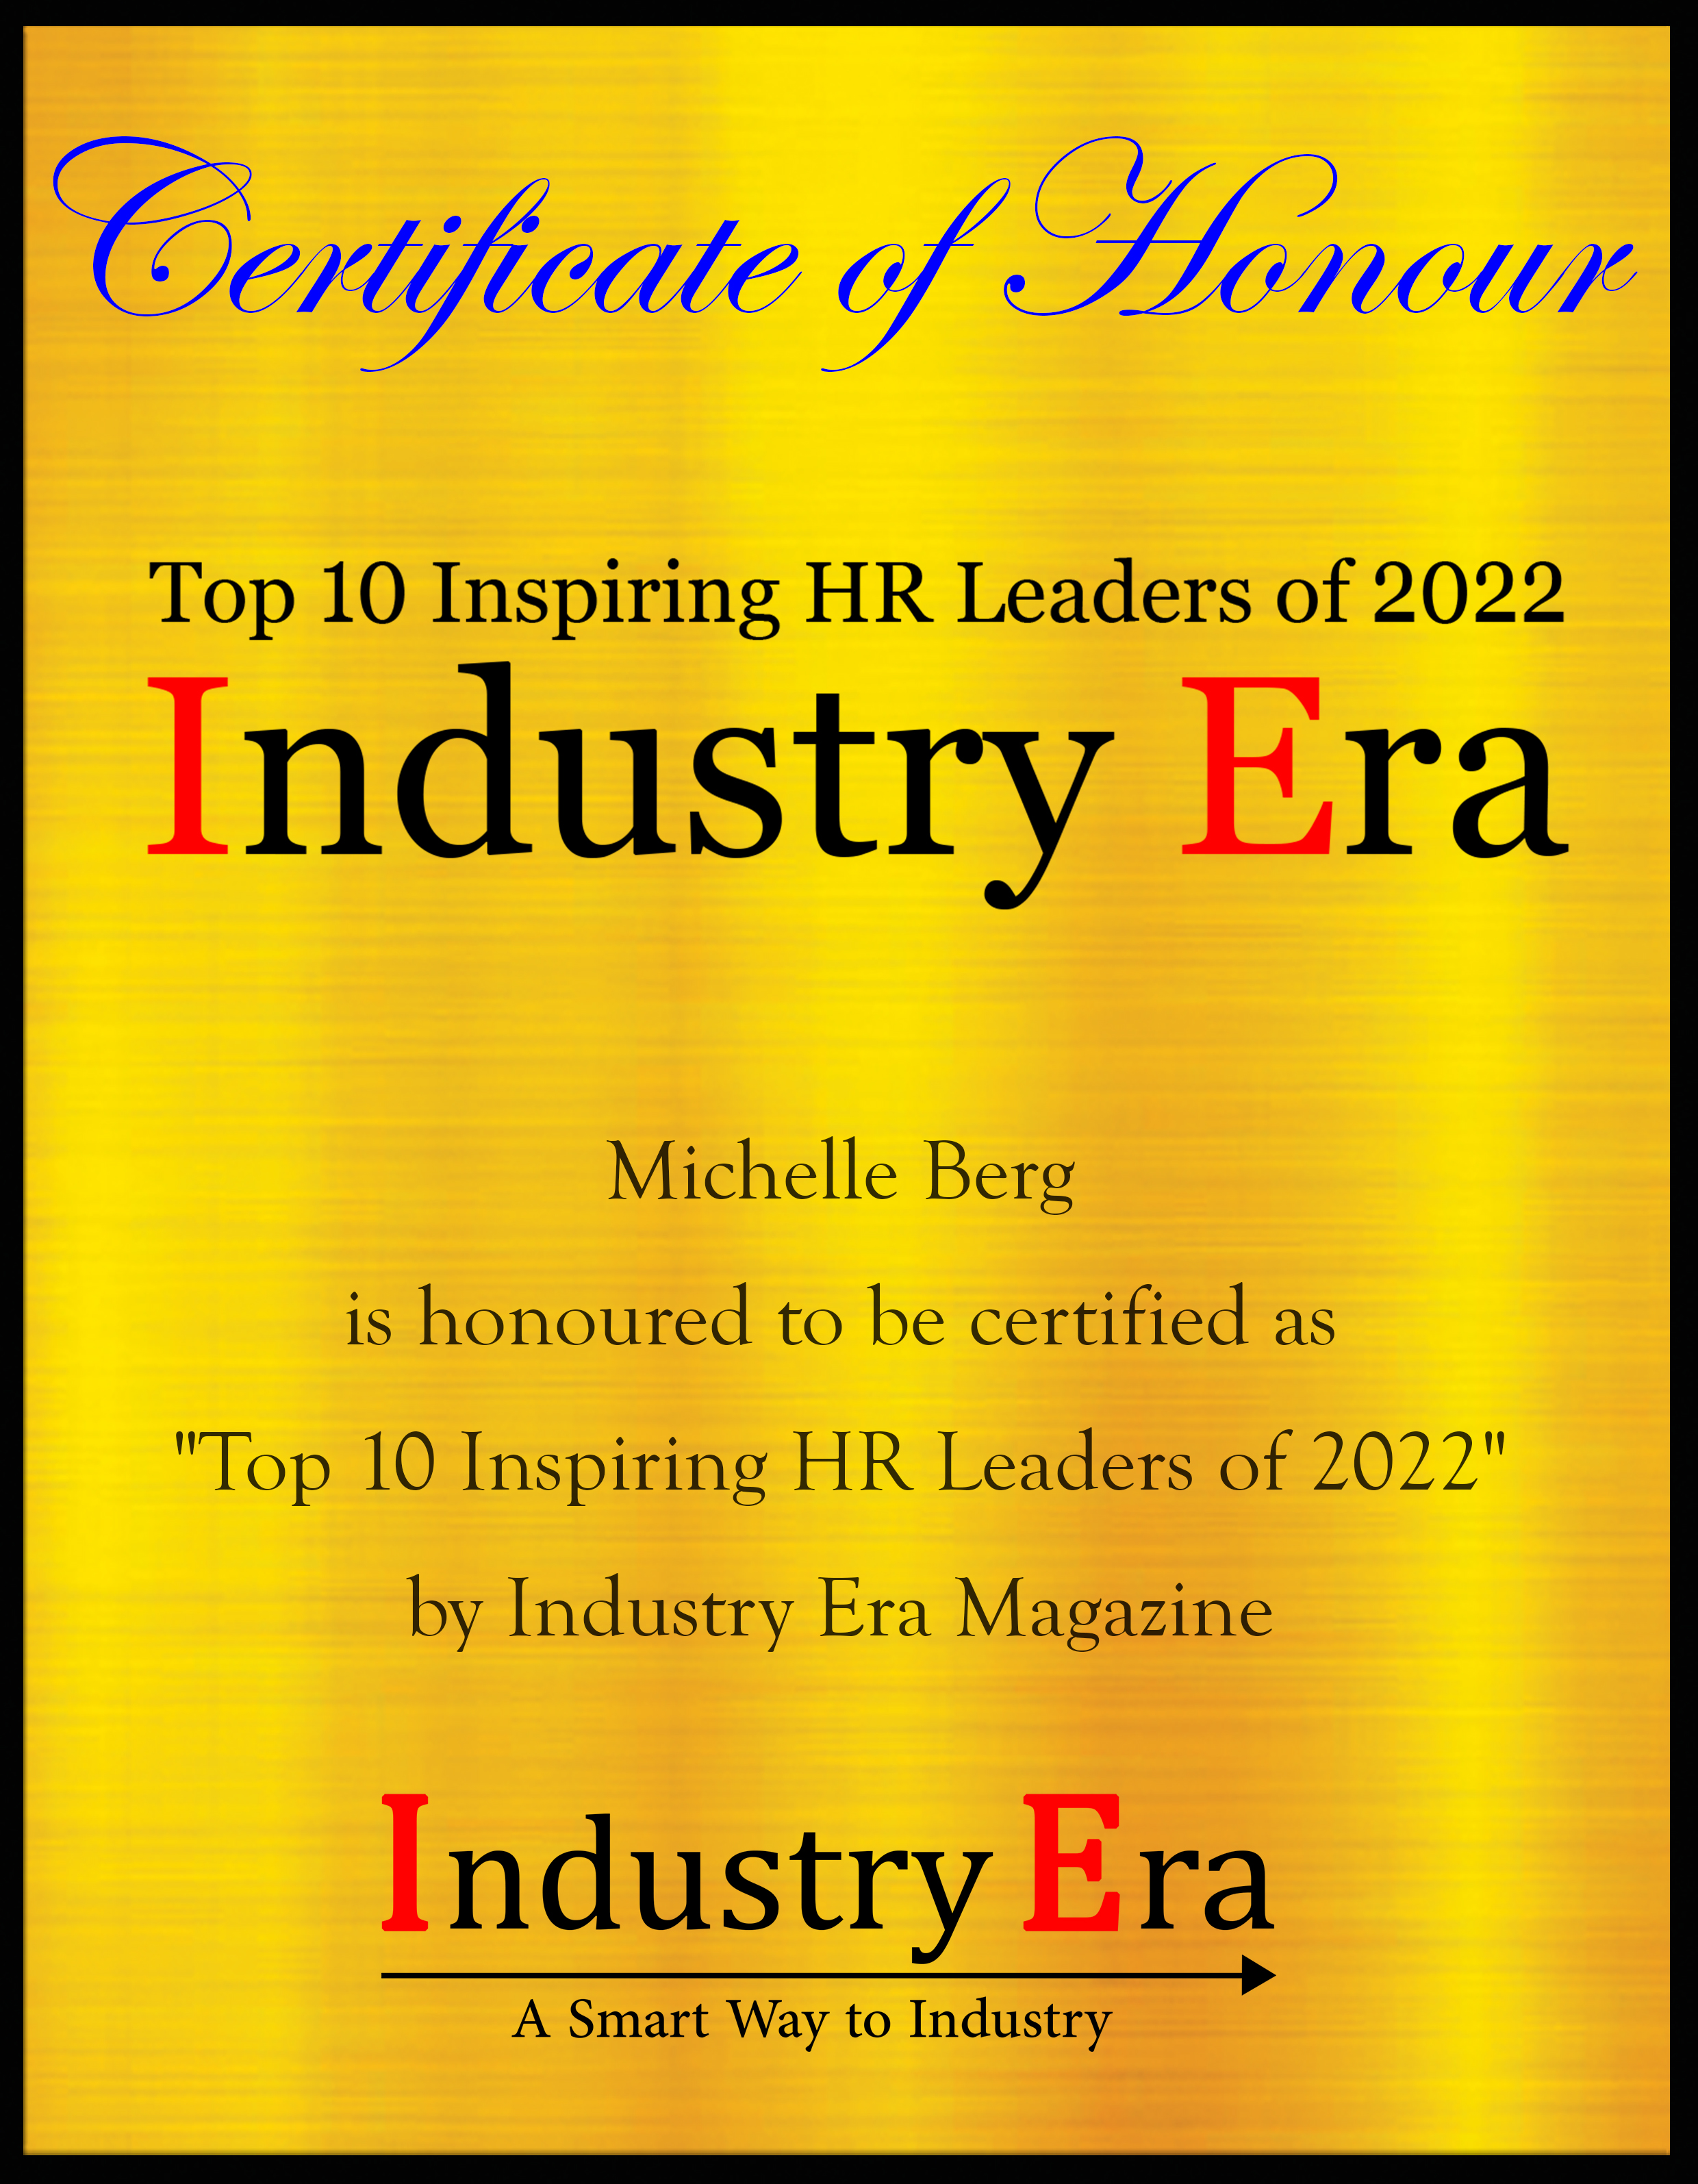 Michelle Berg, CPHR at Elevated HR Solutions Certificate